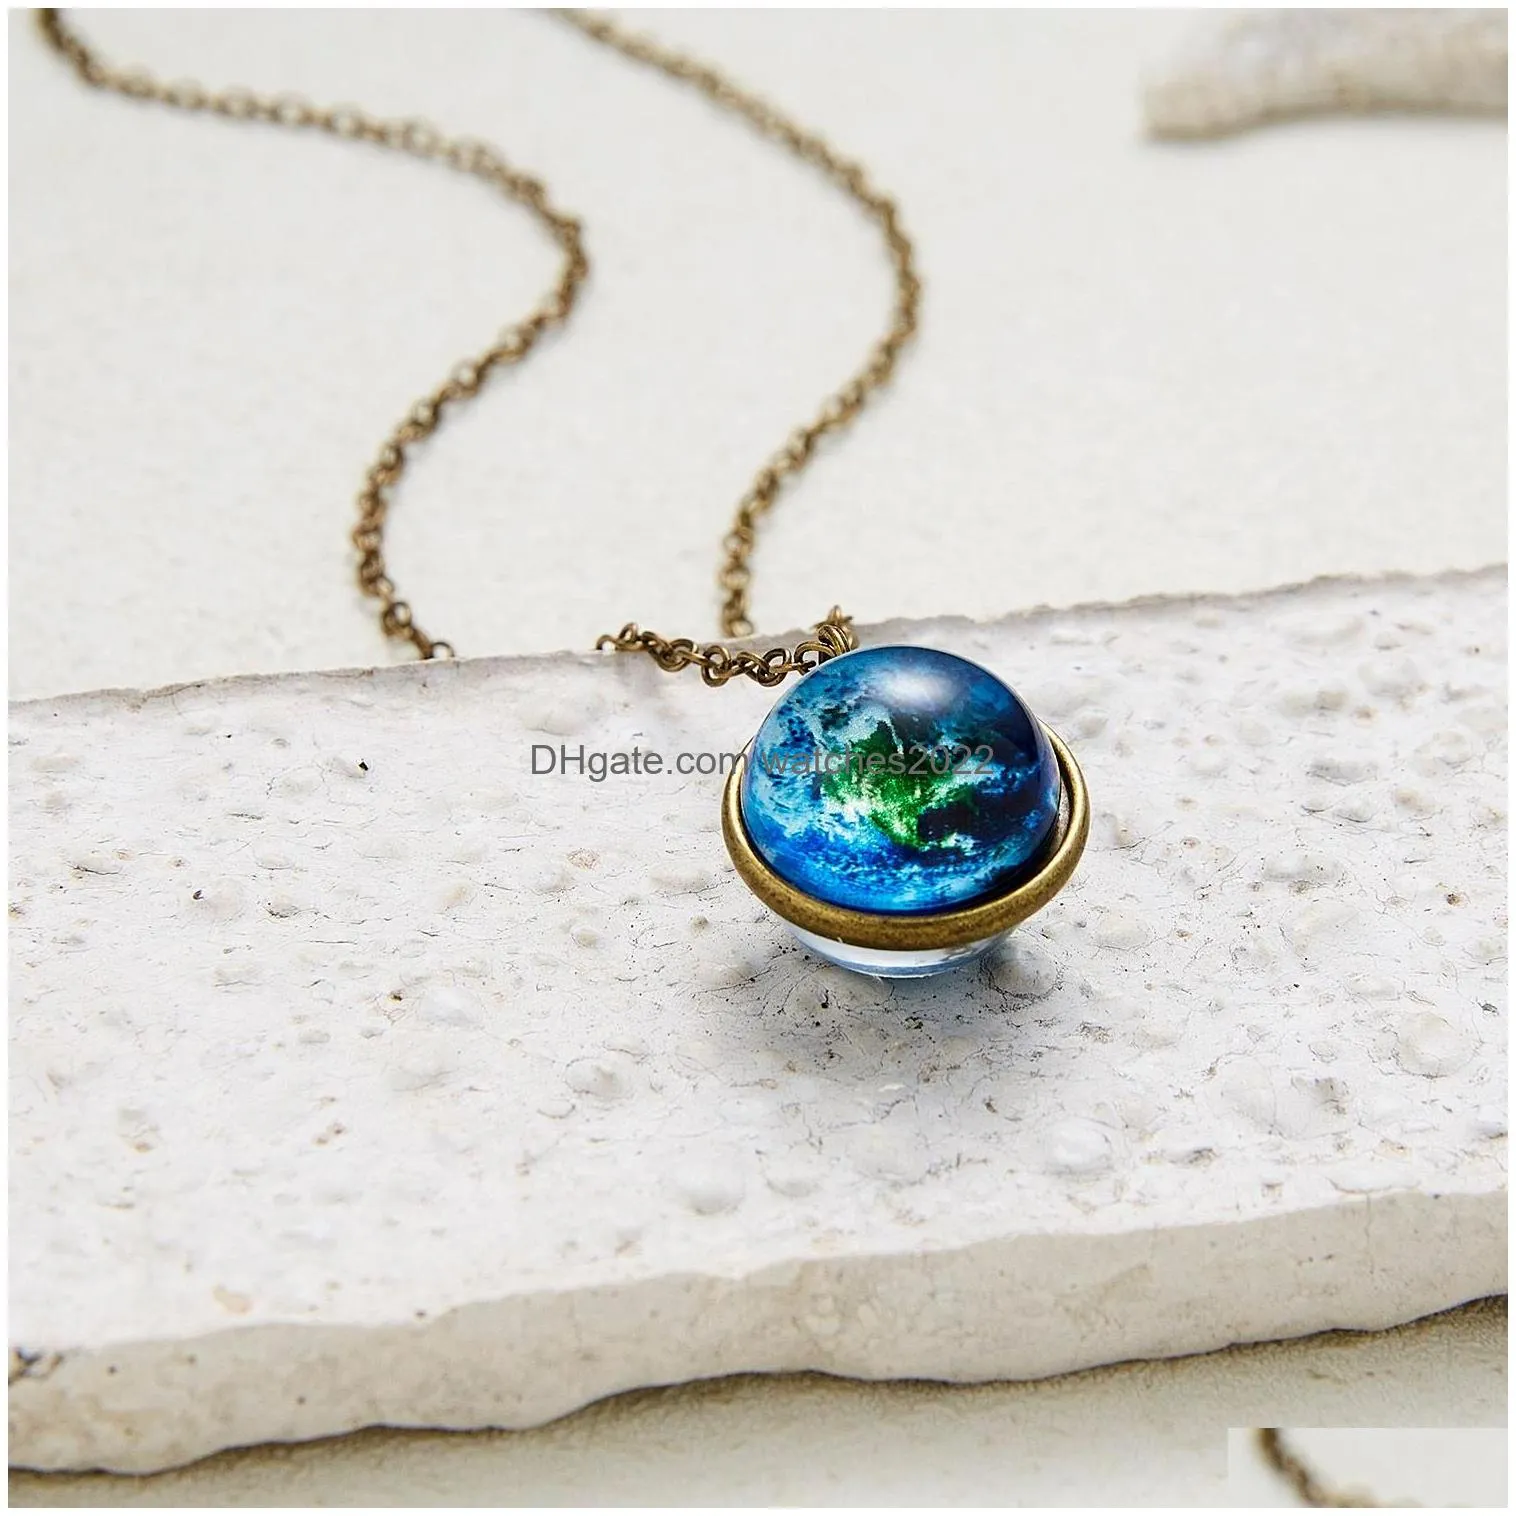 Pendant Necklaces Vintage Colorf Galaxy Universe Round Necklace Glow In The Dark Glass Ball Metal Link Chain Choker Fashion Jewelry Gi Dhpnj